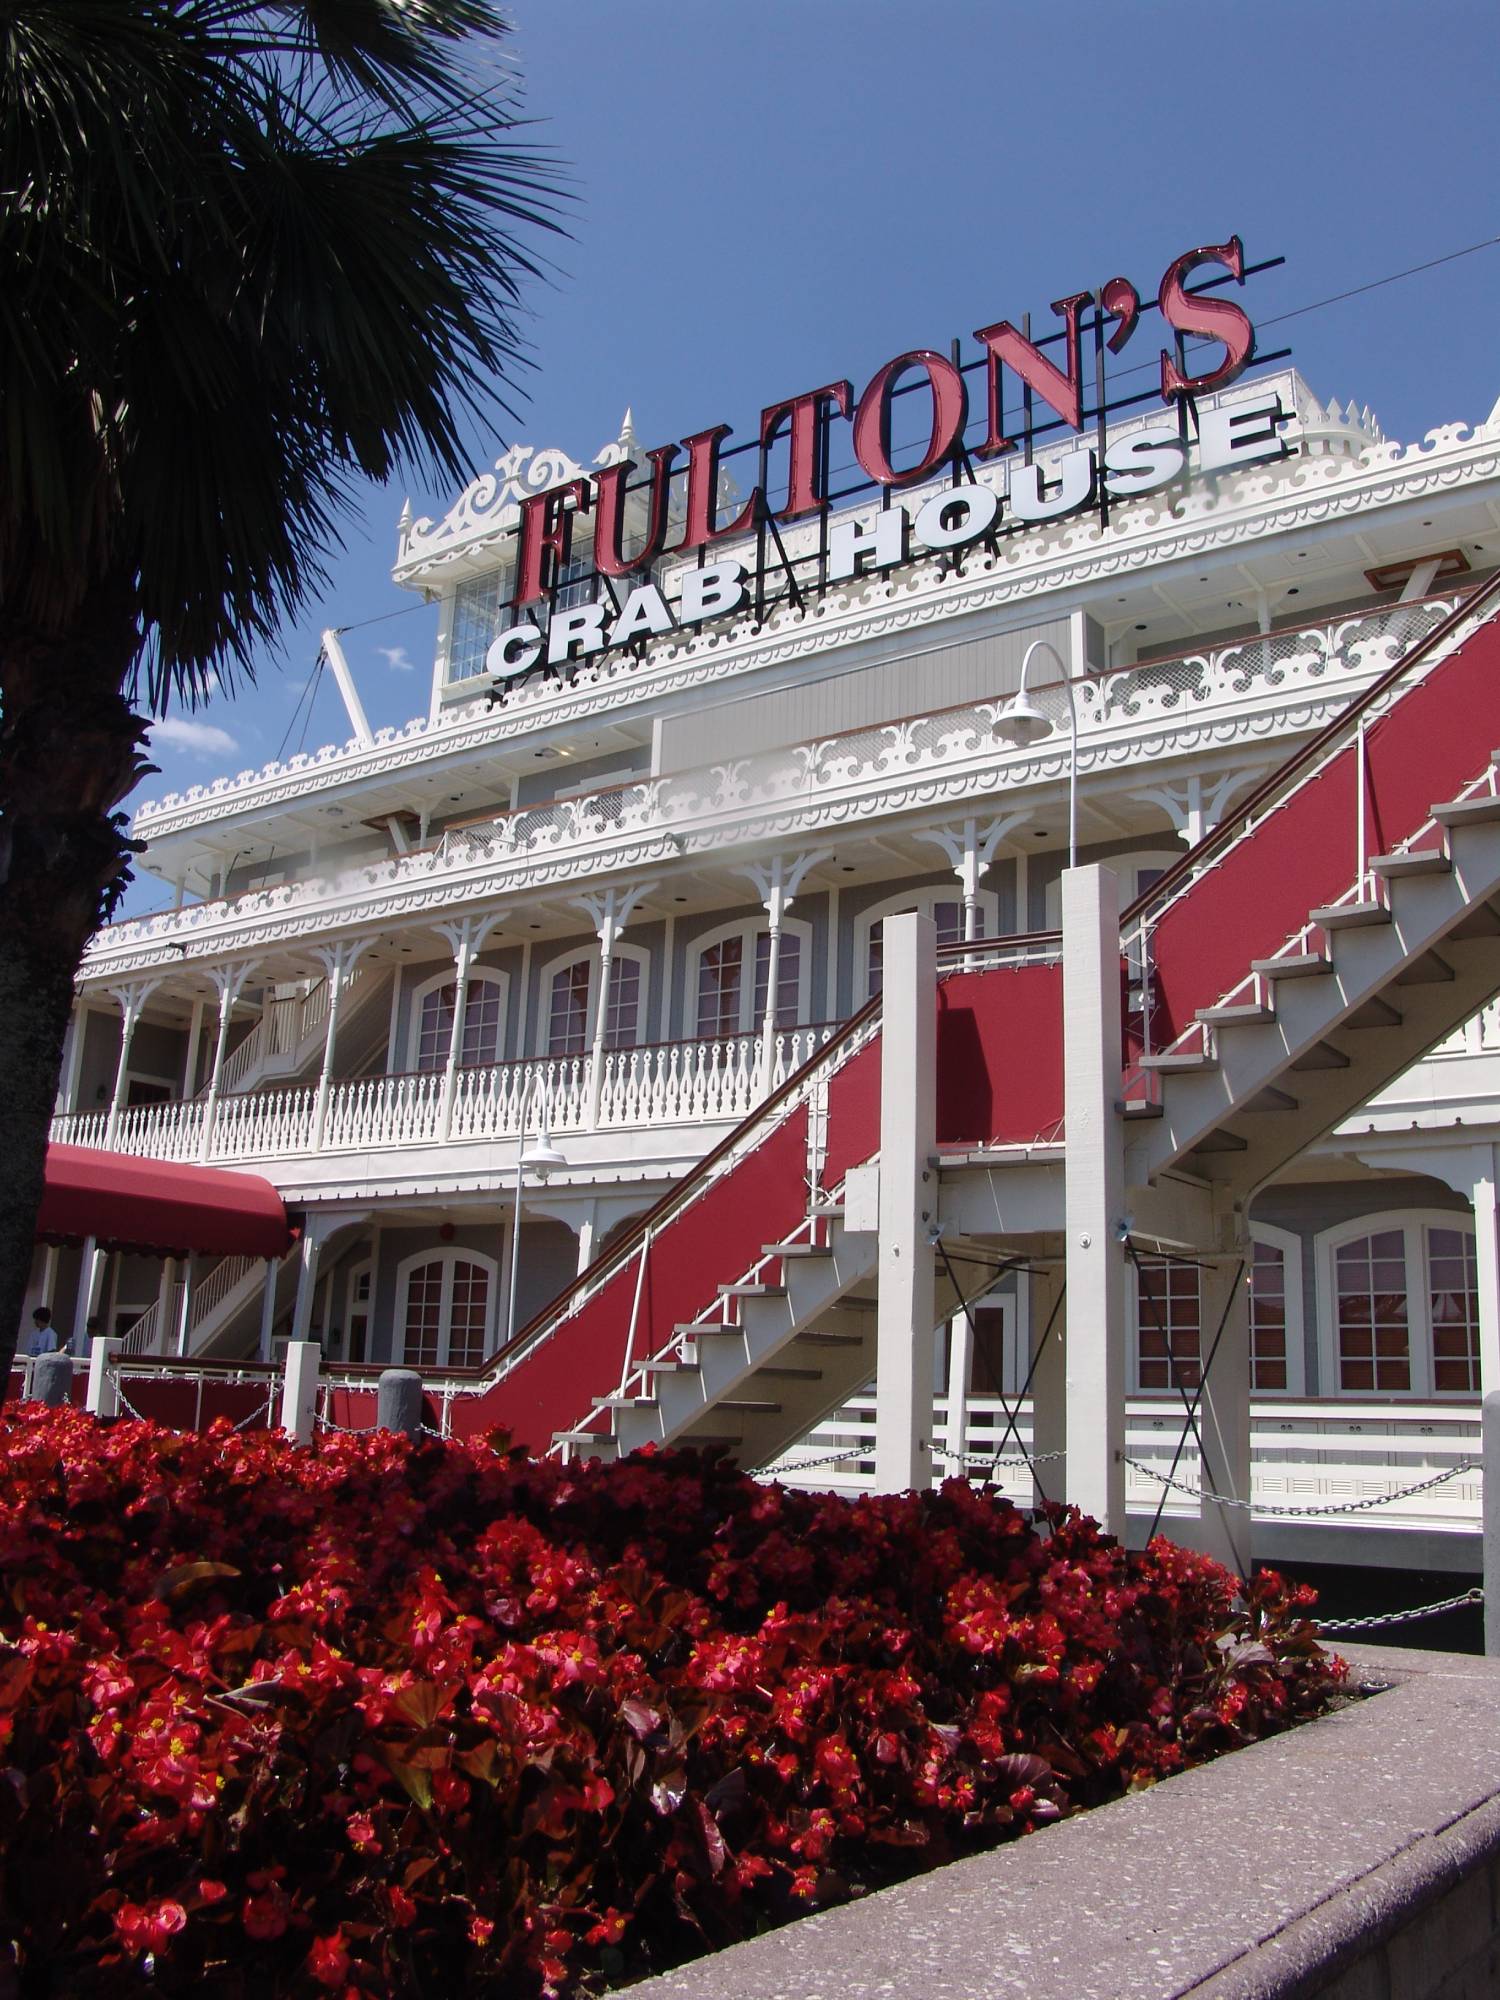 Enjoy the seafood at Fulton's Crab House in Downtown Disney |PassPorter.com